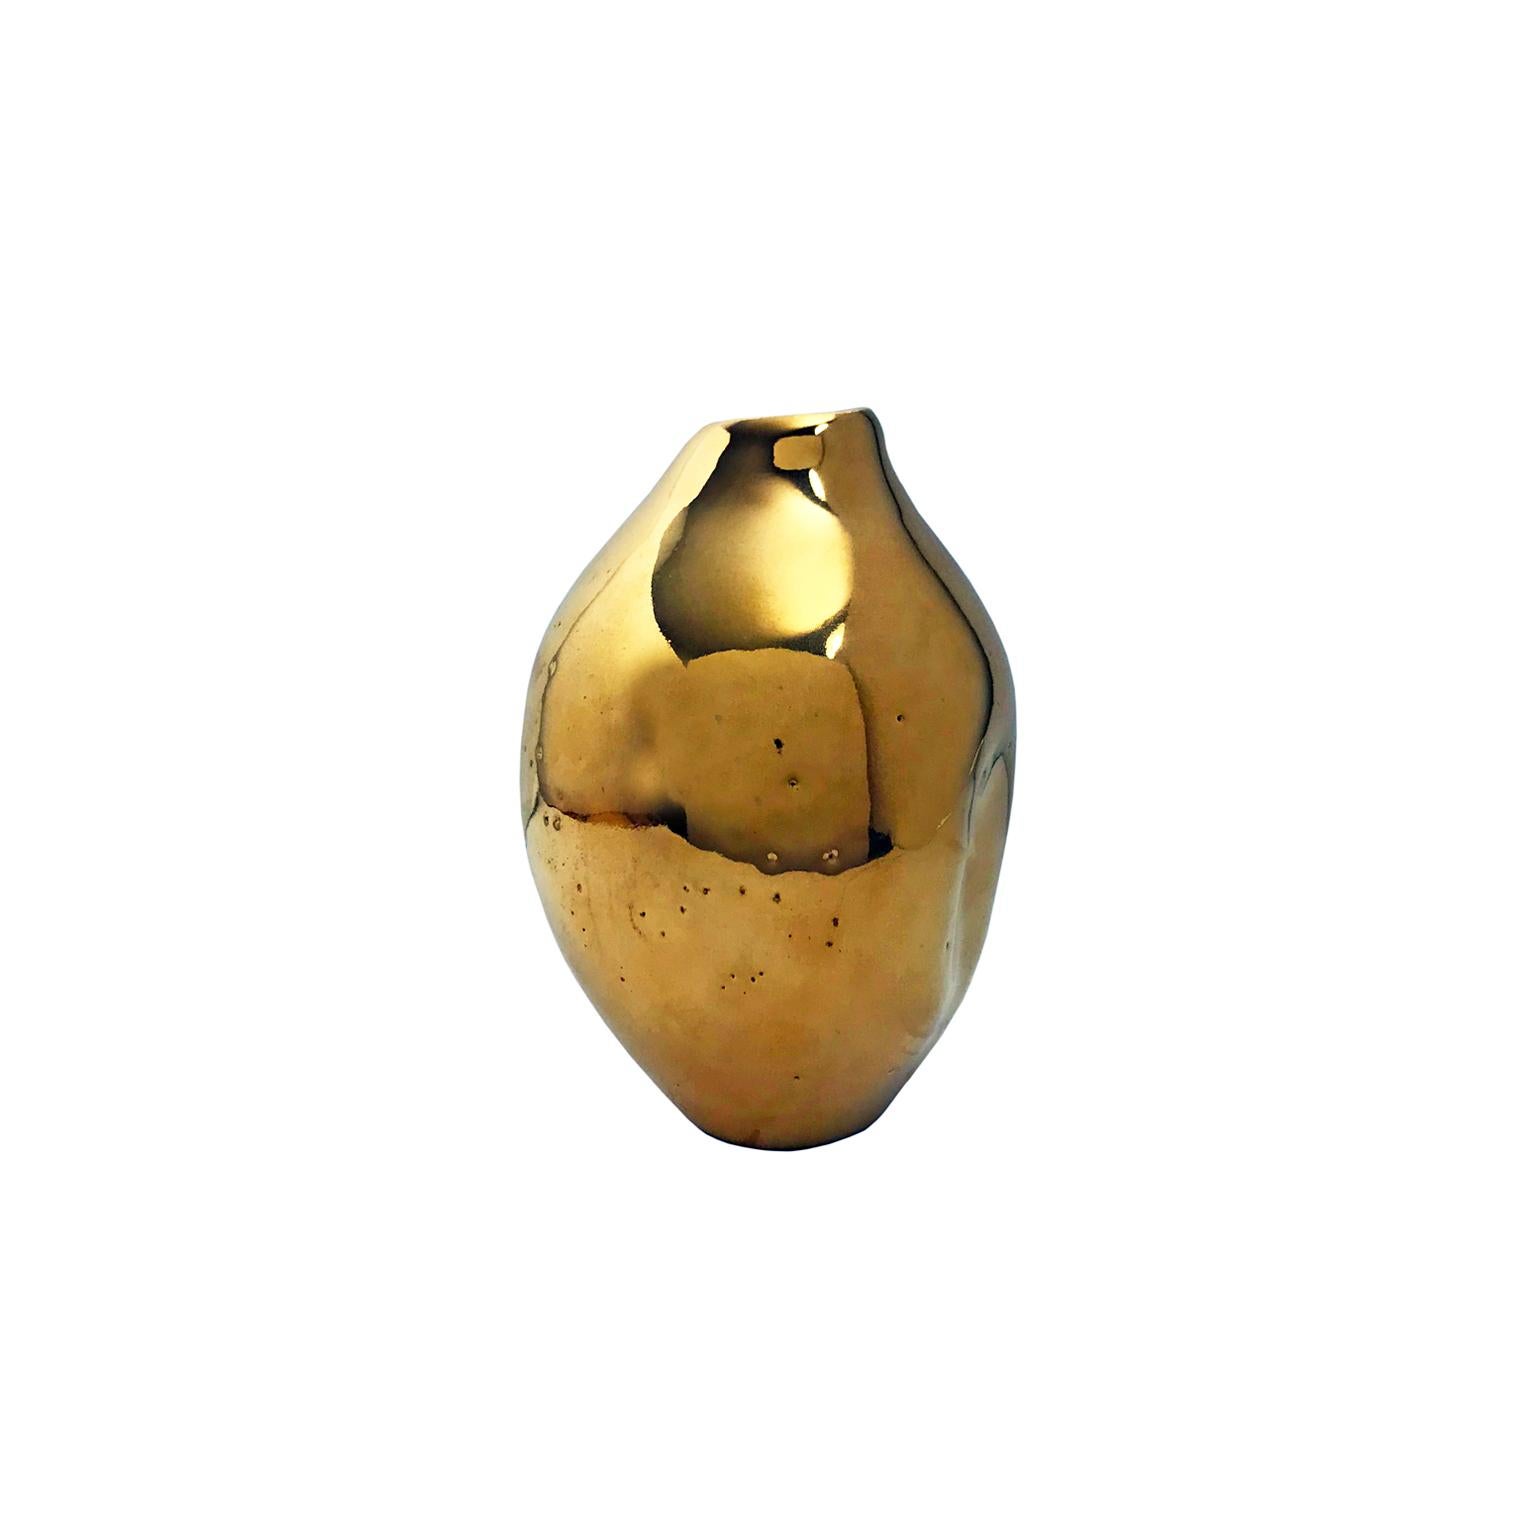 Small 22-karat gold lustre glaze ceramic vase #5 with double dent by Sandi Fellman, 2018. 

Veteran photographer Sandi Fellman's ceramic vessels are an exploration of a new medium. The forms, palettes, and sensuality of her photos can be found